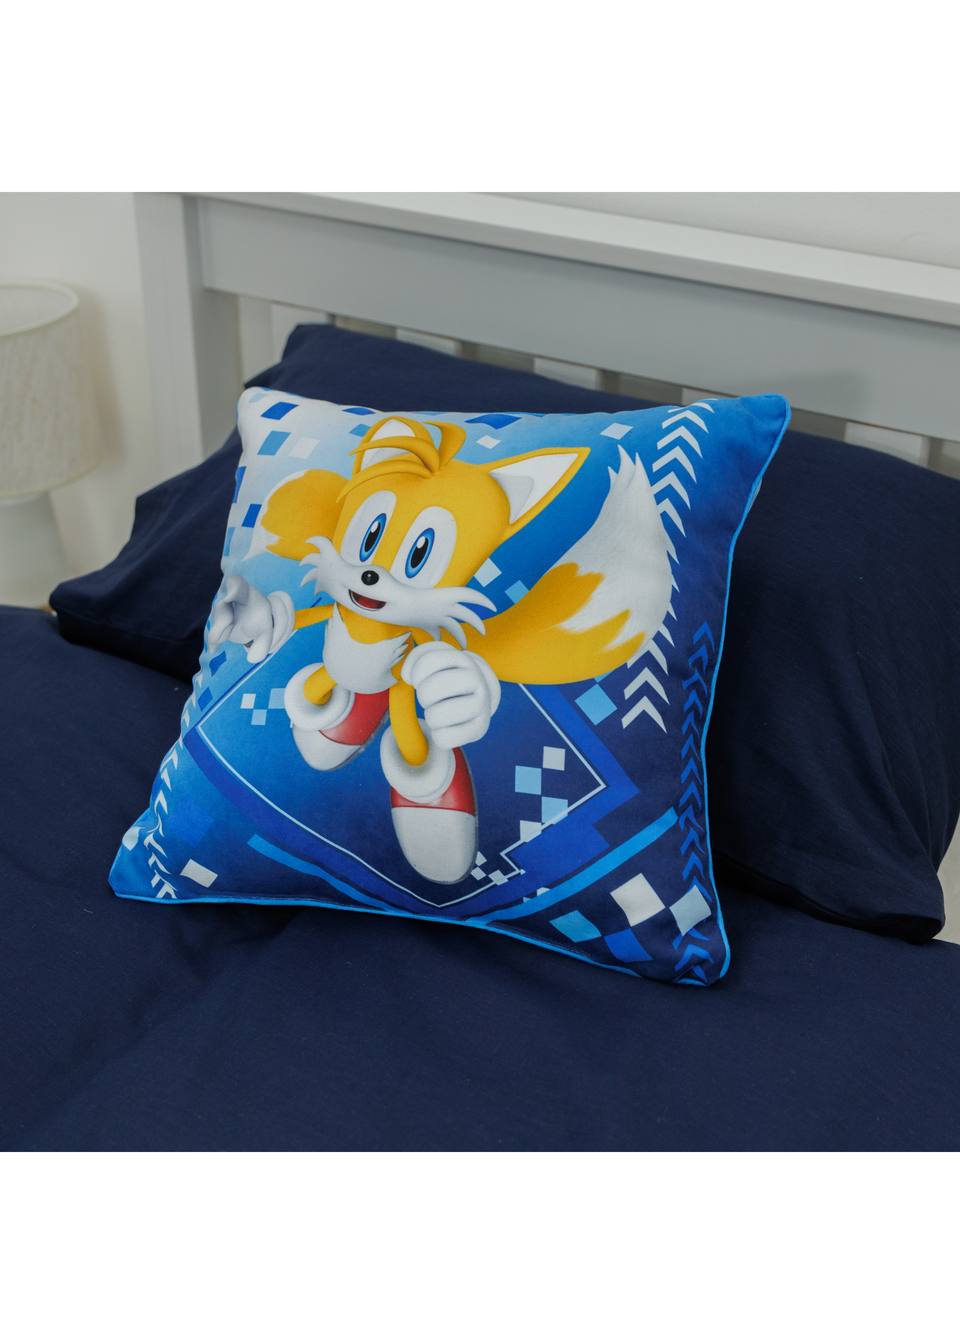 Sonic Bounce Square Cushion